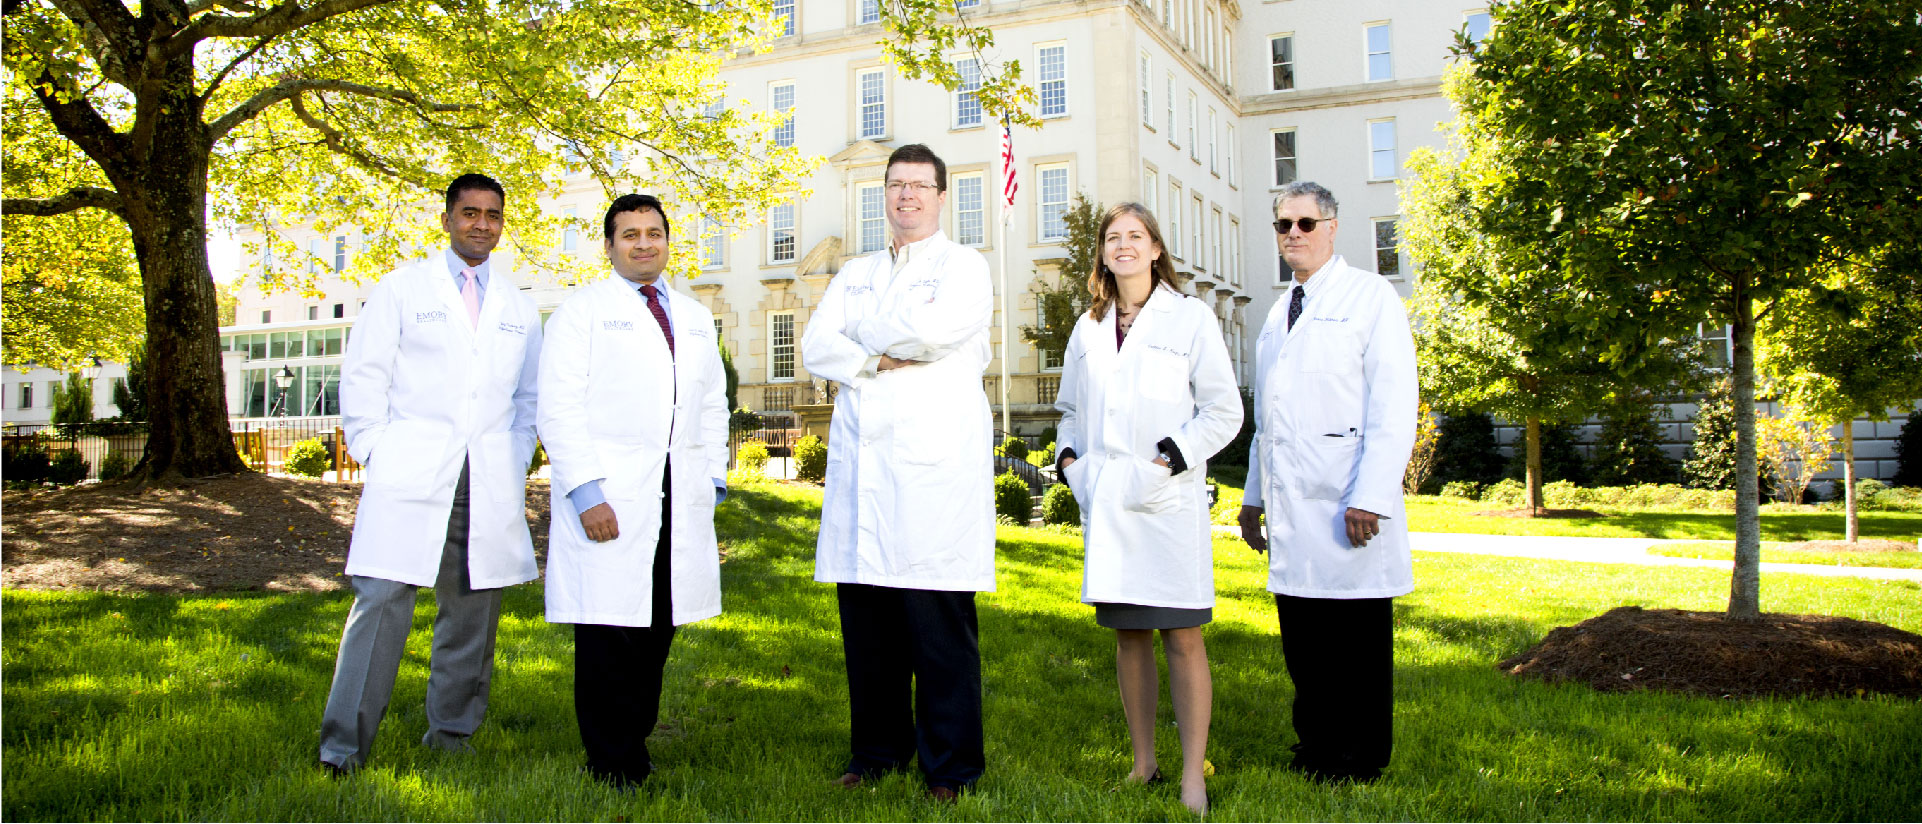 Group of doctors standing on grass in front of building